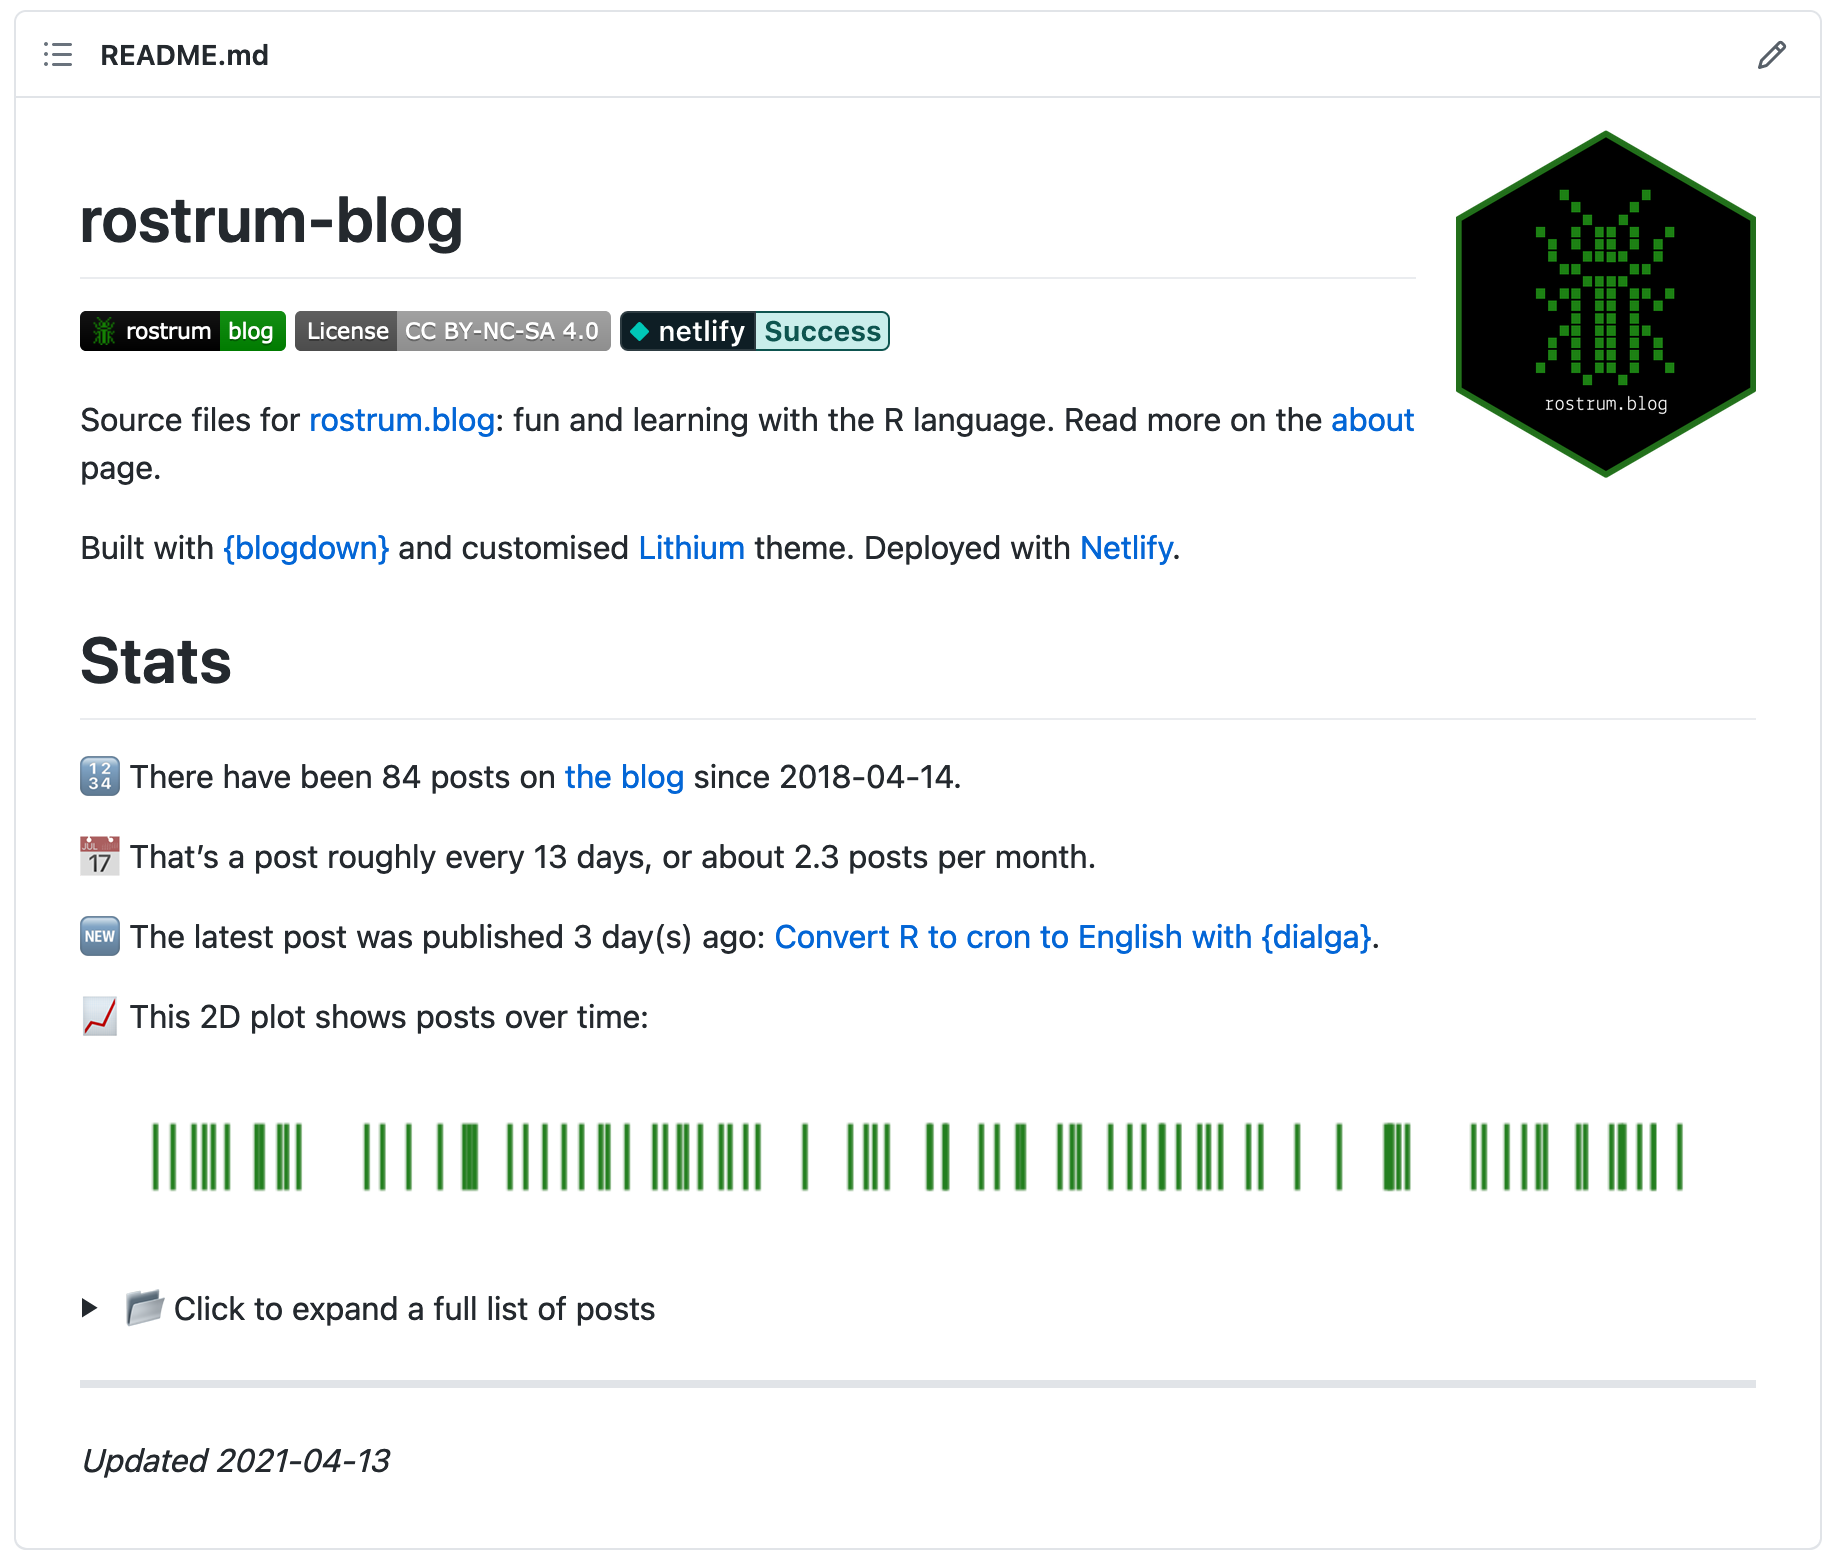 The README file for this blog on GitHub showing up-to-date stats on things like the number of posts, posting rates and a chart showing posts over time.